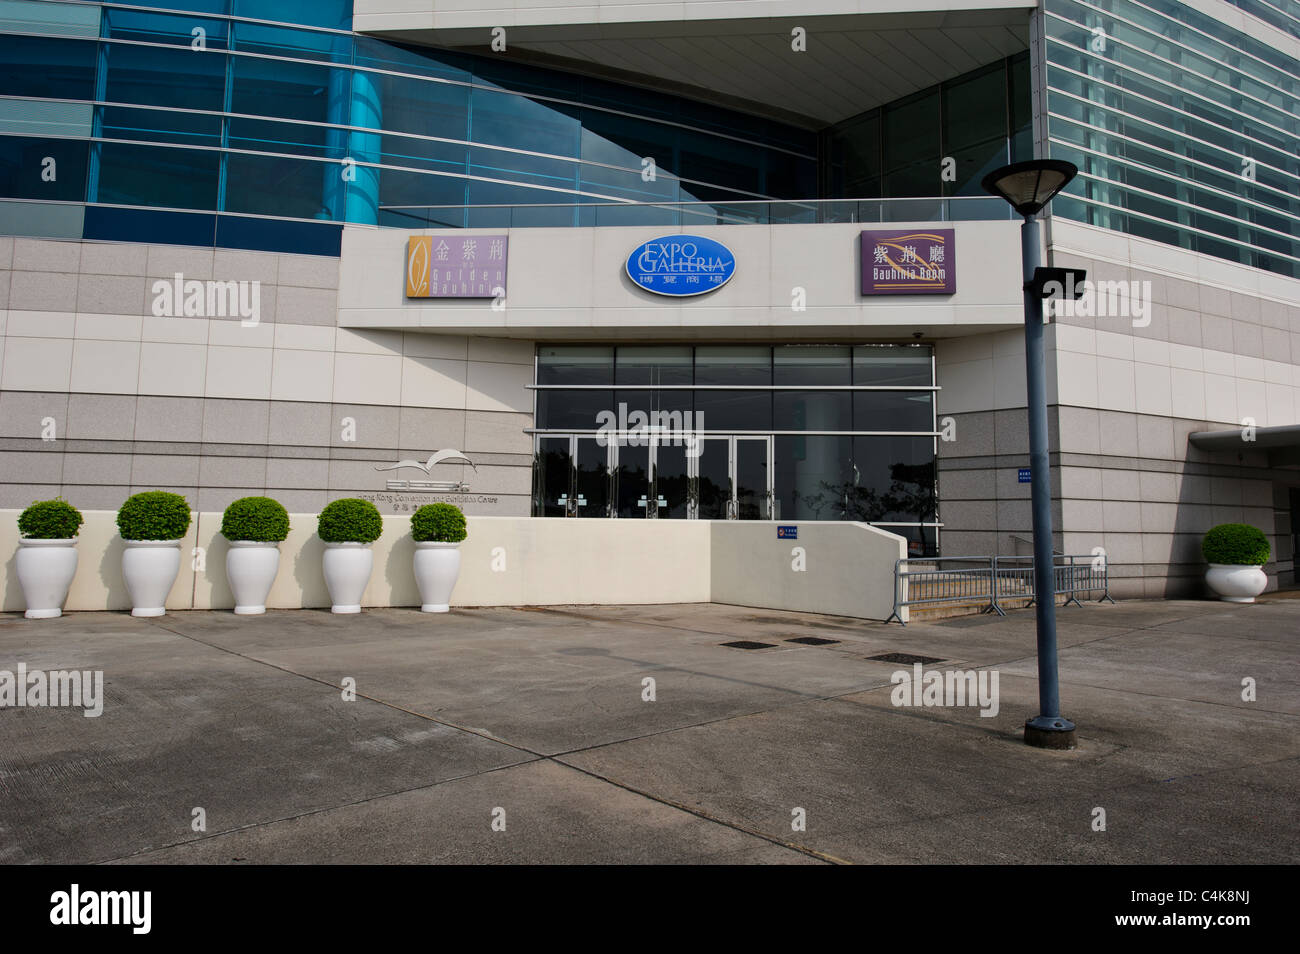 One of the entrances to the HK Convention and Exhibition Centre, Hong Kong Island, China. Stock Photo